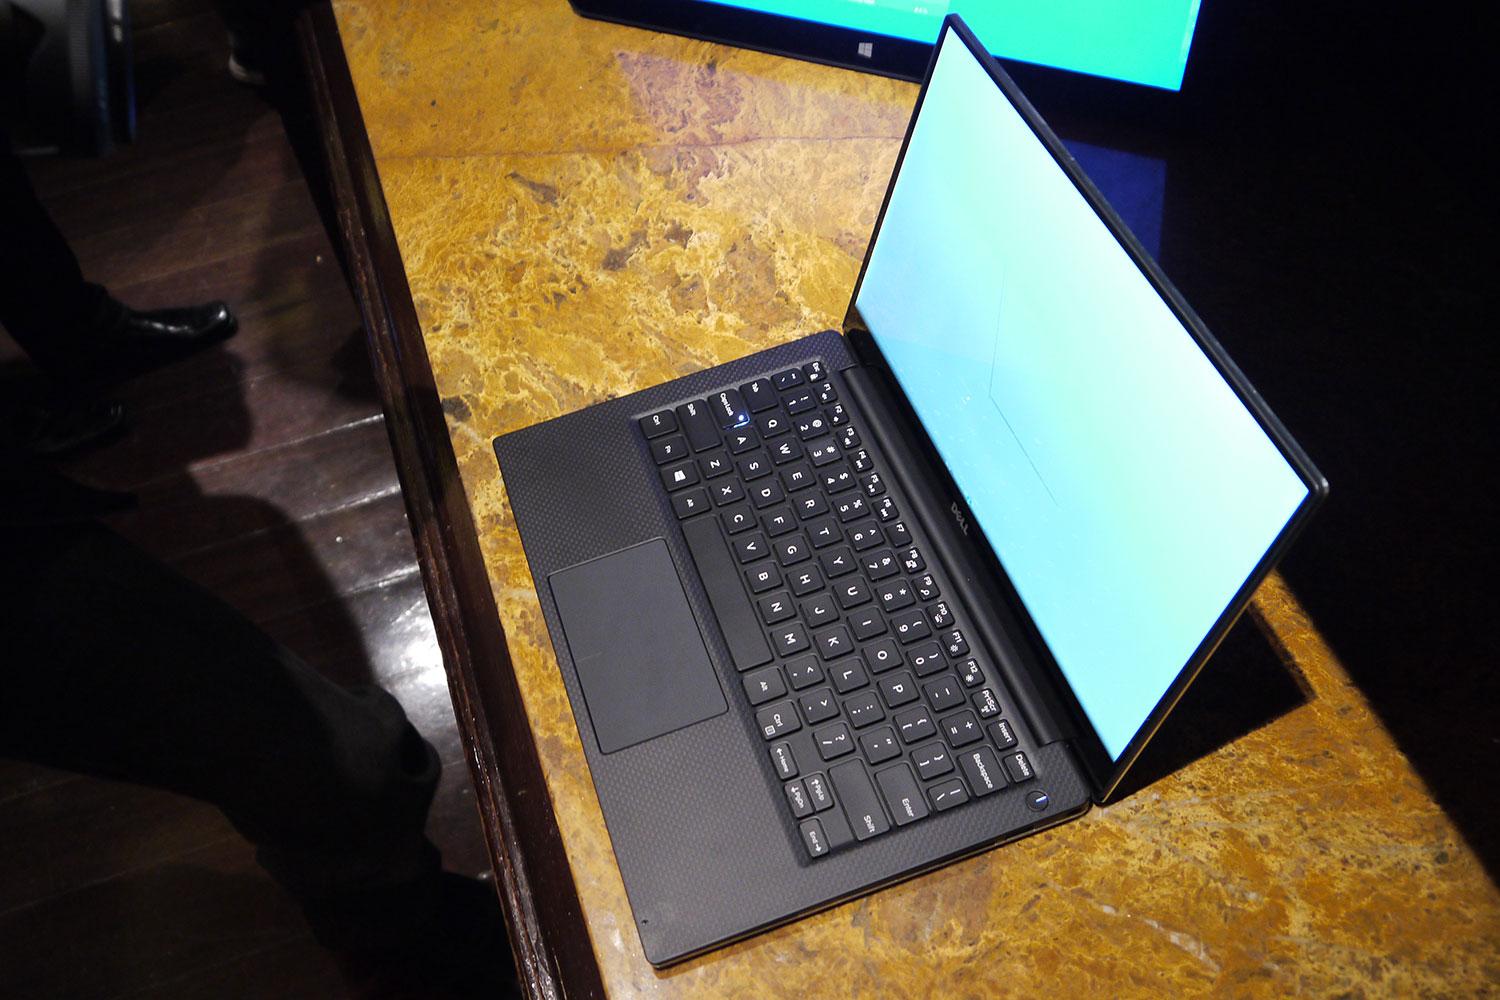 dell xps 13 laptop has a screen with virtually no bezel hands on p1100331